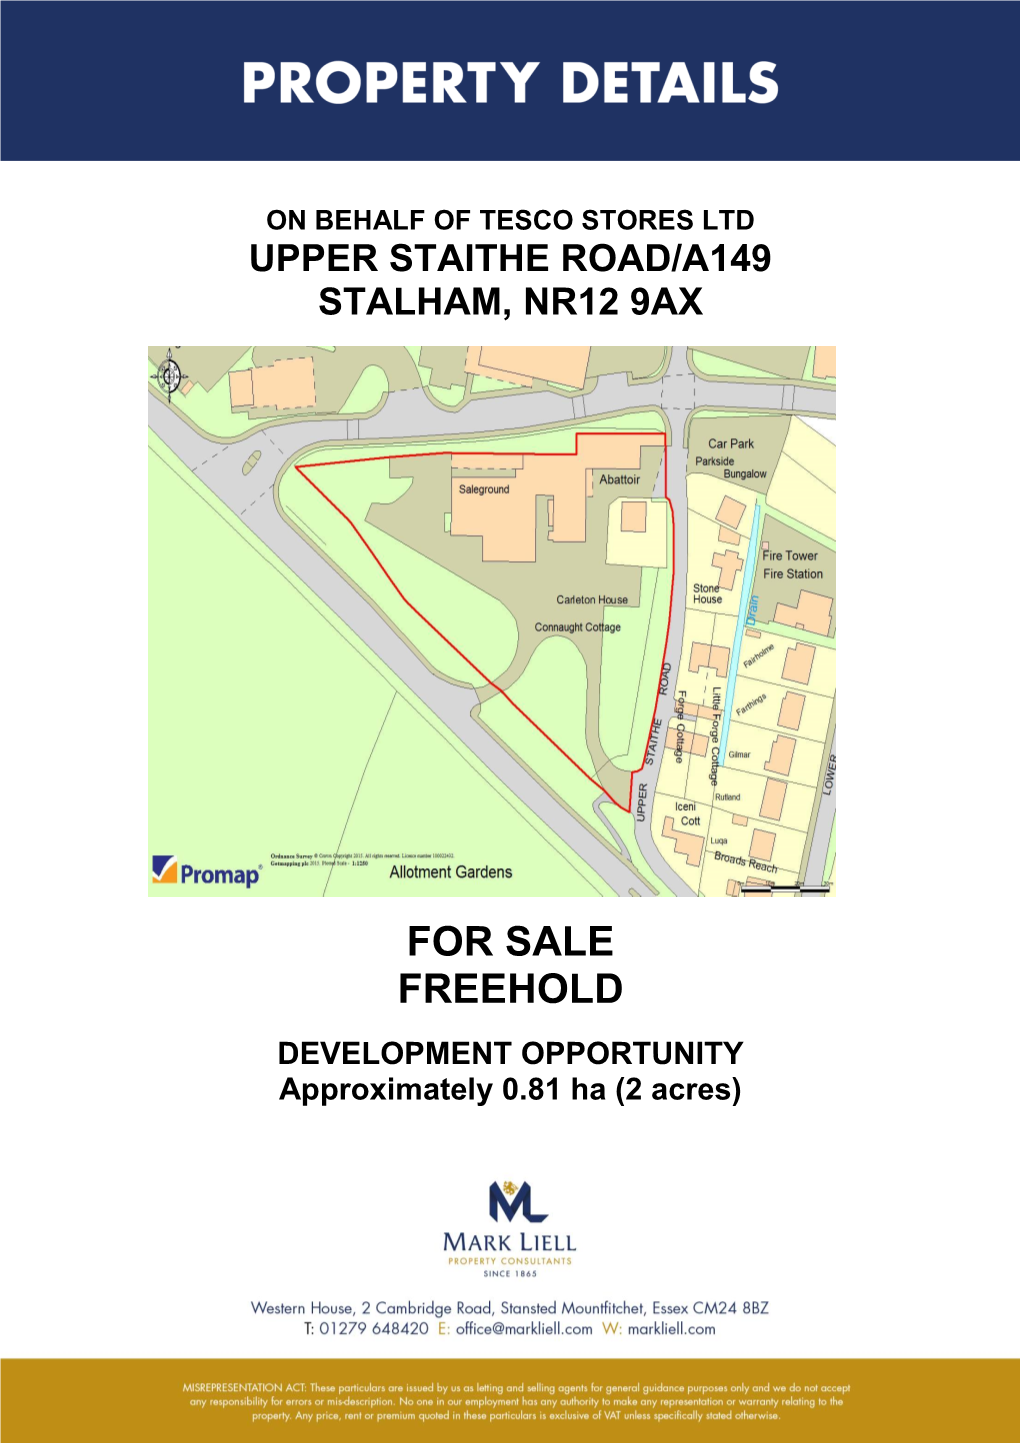 For Sale Freehold